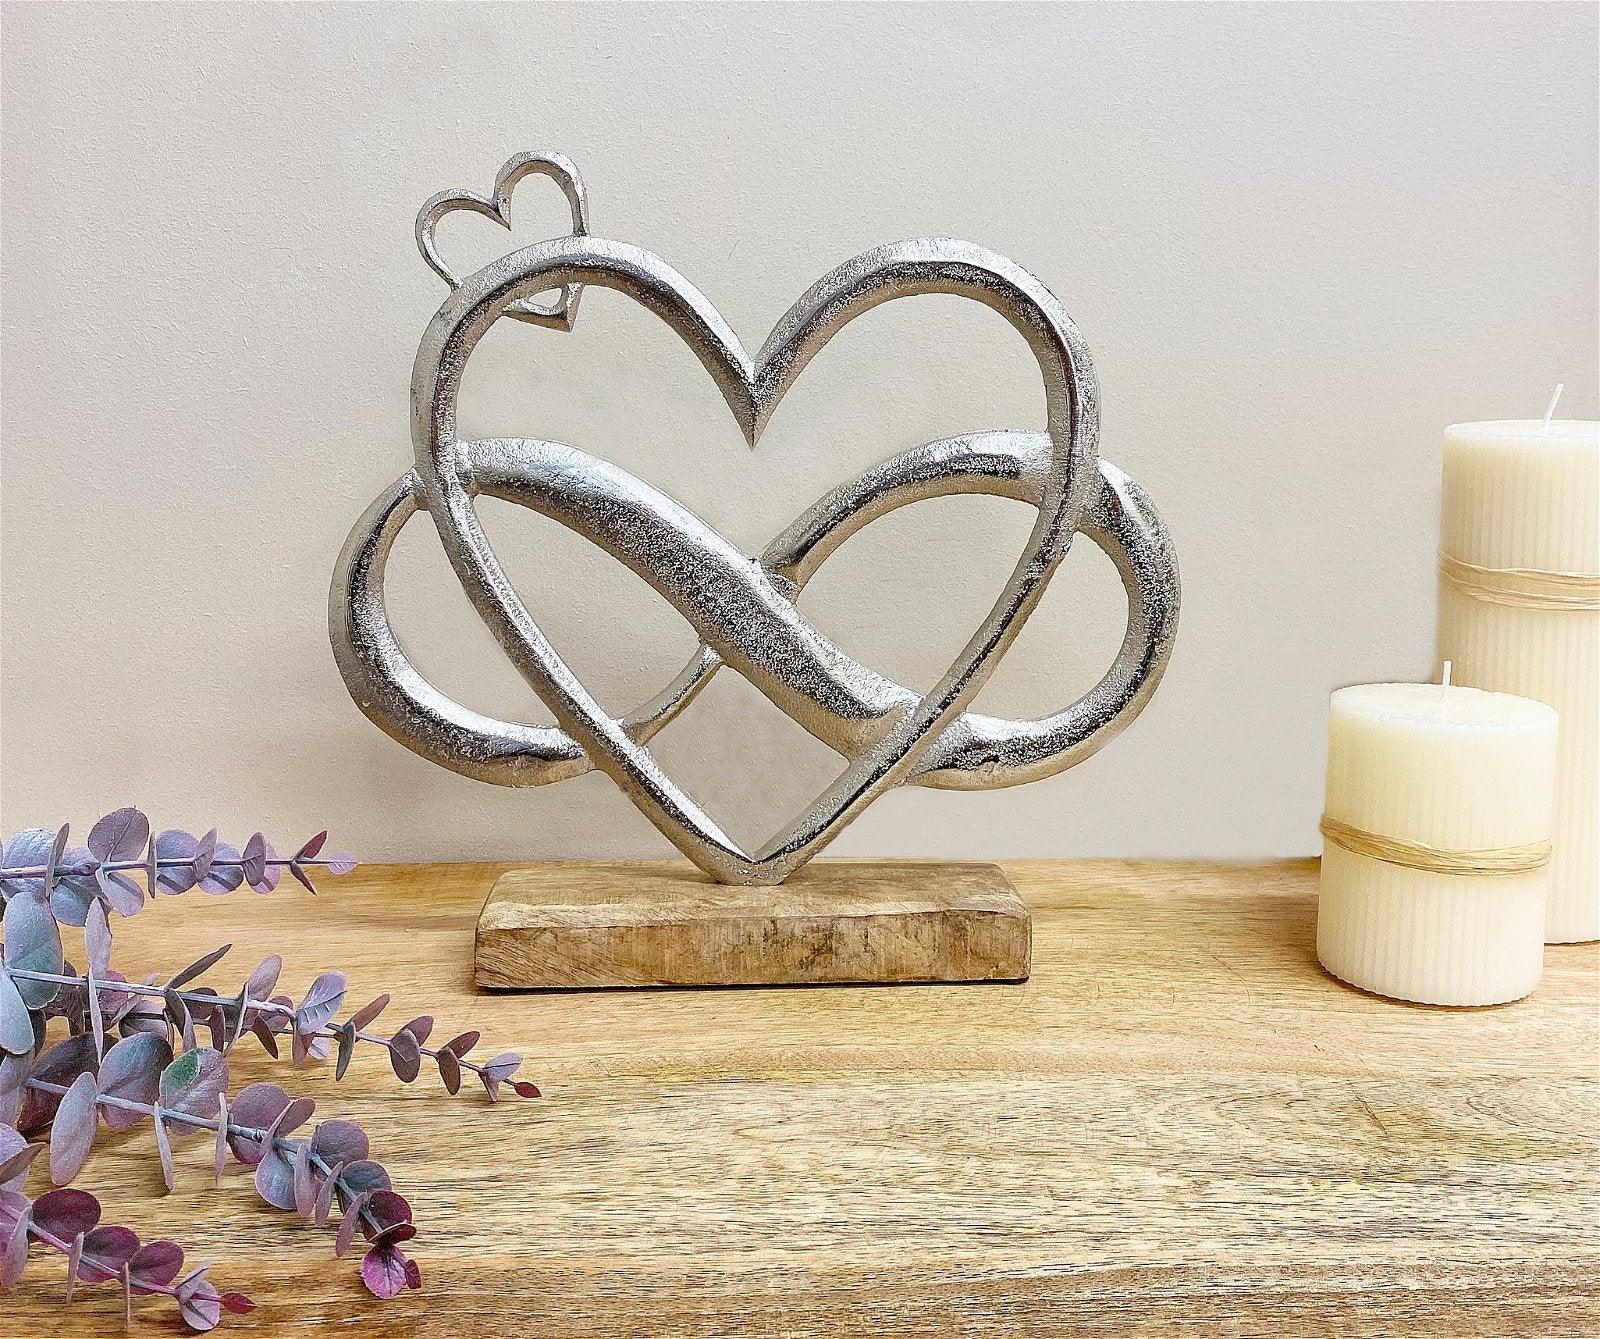 Metal Silver Entwined Hearts On A Wooden Base Large - £26.99 - 